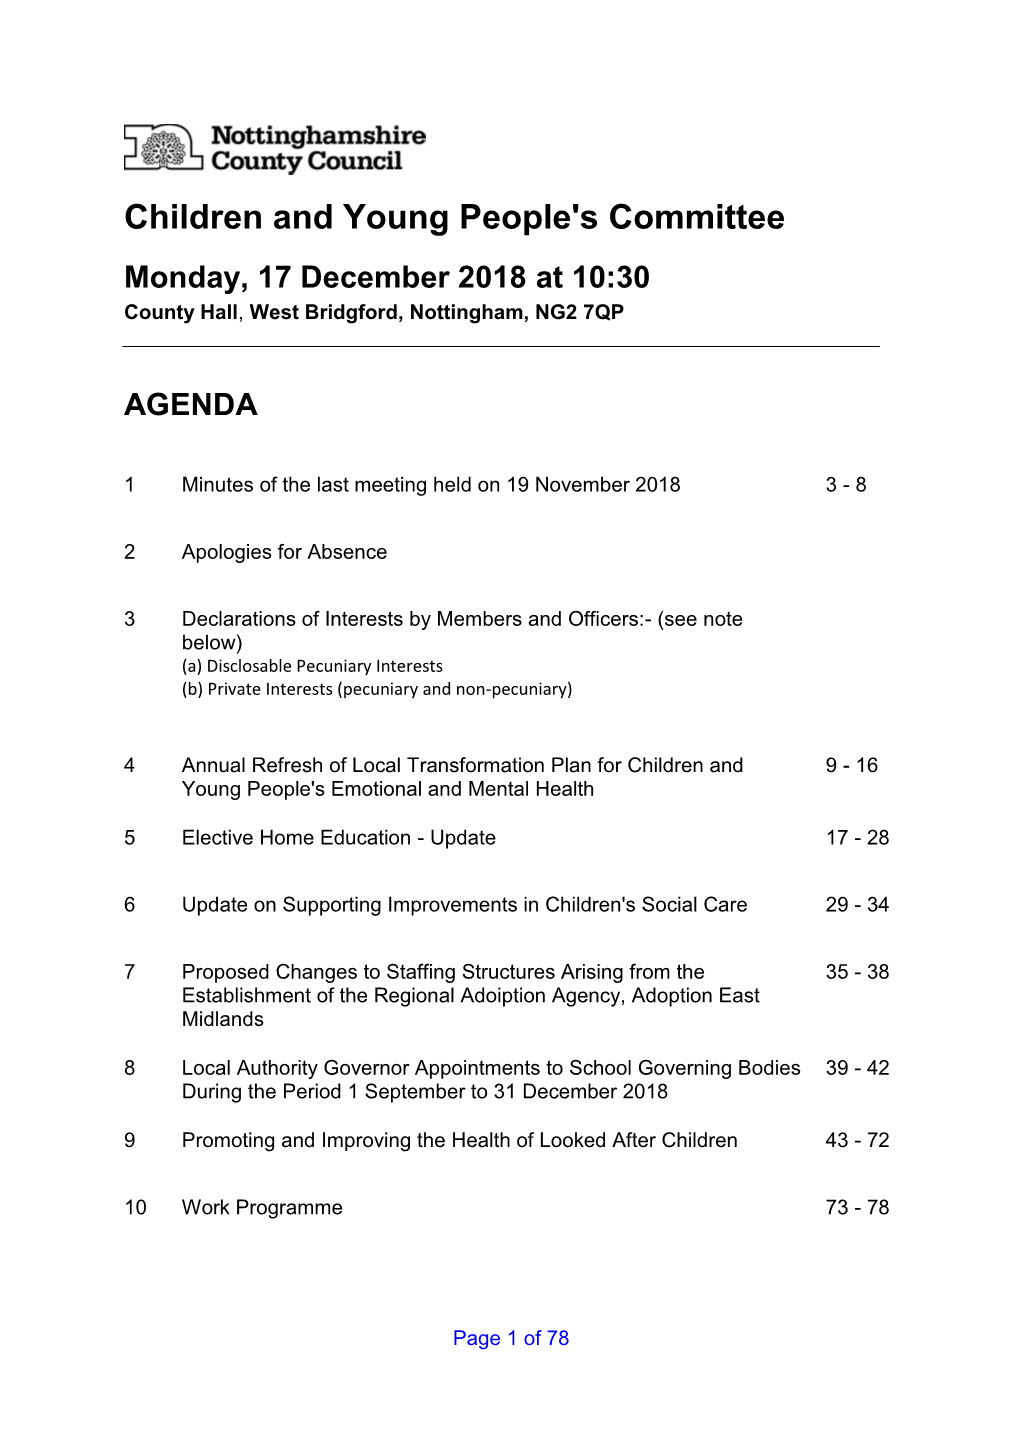 Children and Young People's Committee Monday, 17 December 2018 at 10:30 County Hall, West Bridgford, Nottingham, NG2 7QP